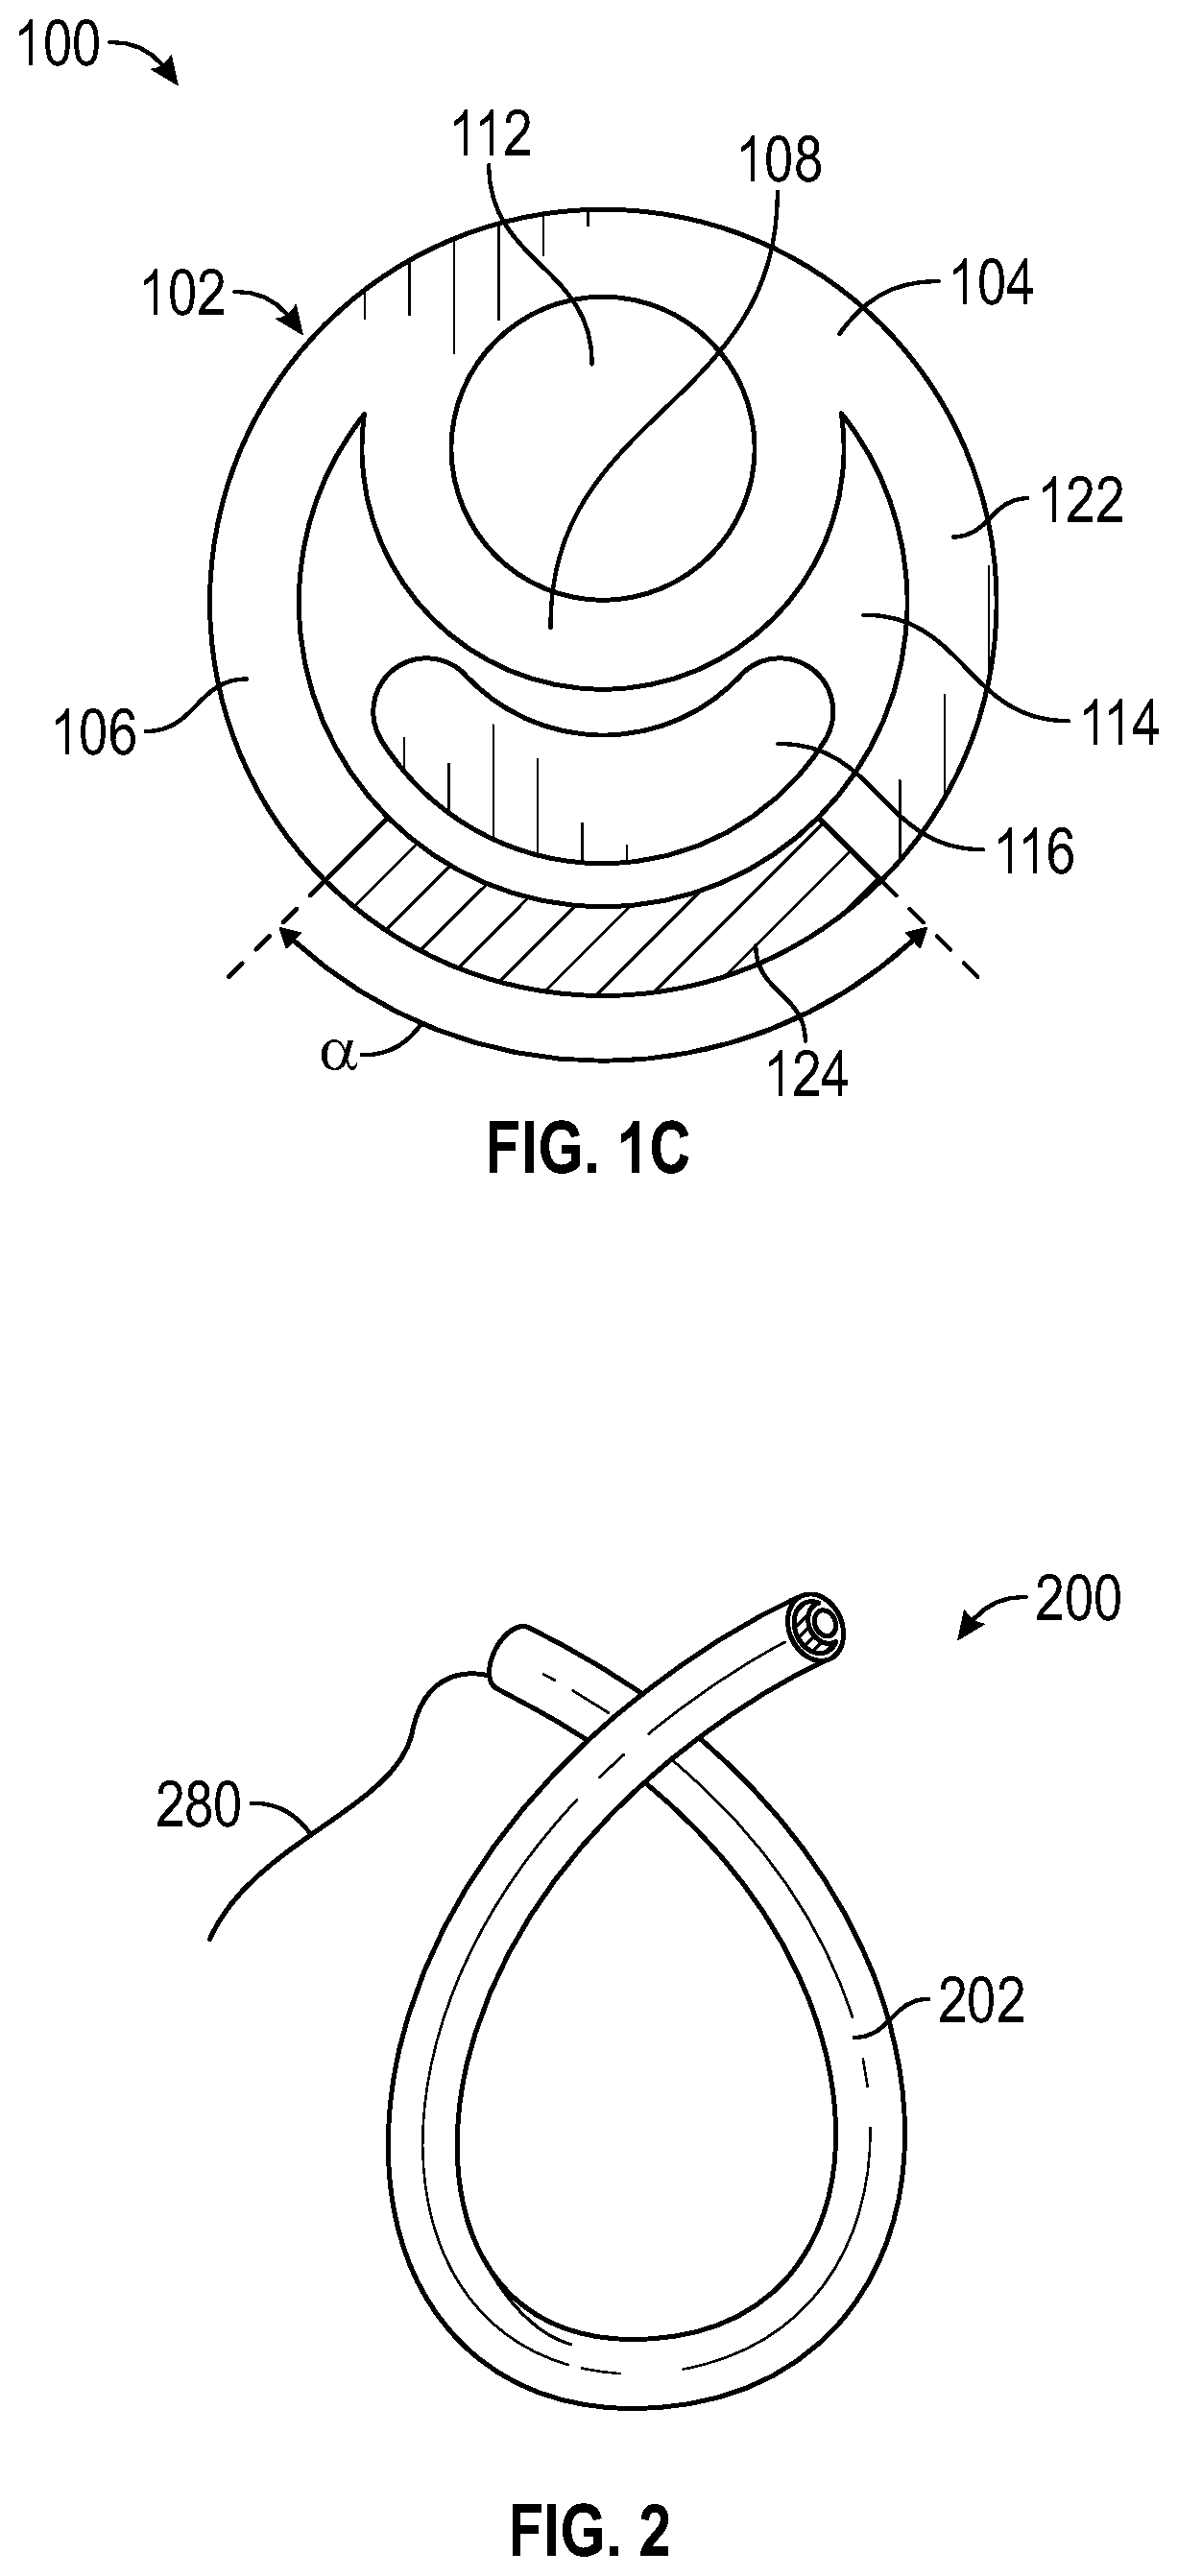 Drug Delivery Devices and Systems for Local Drug Delivery to the Upper Urinary Tract